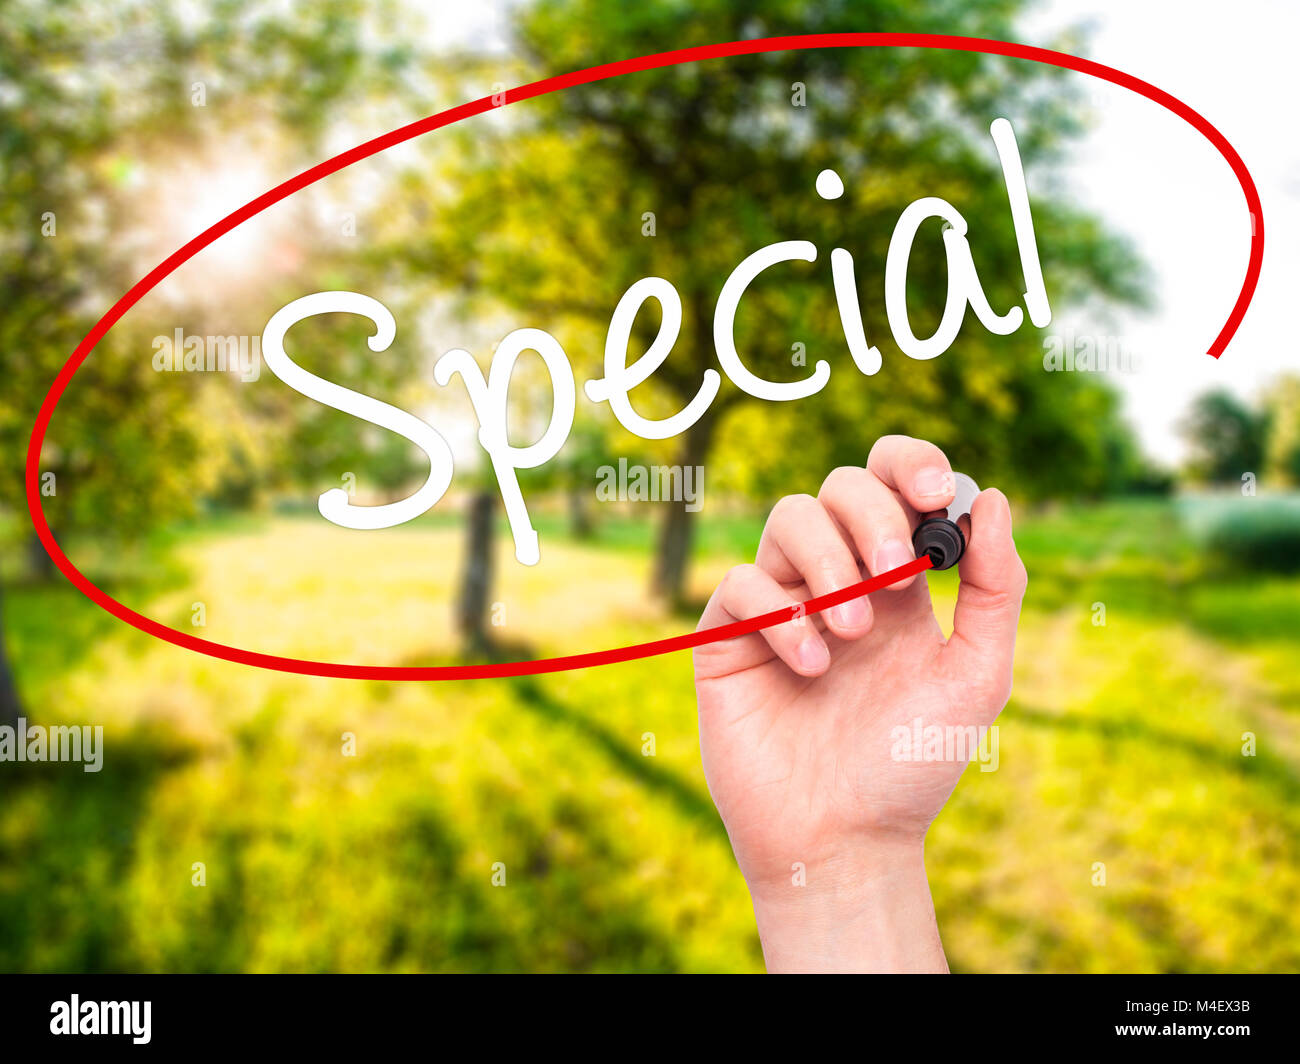 Man Hand writing Special with black marker on visual screen Stock Photo